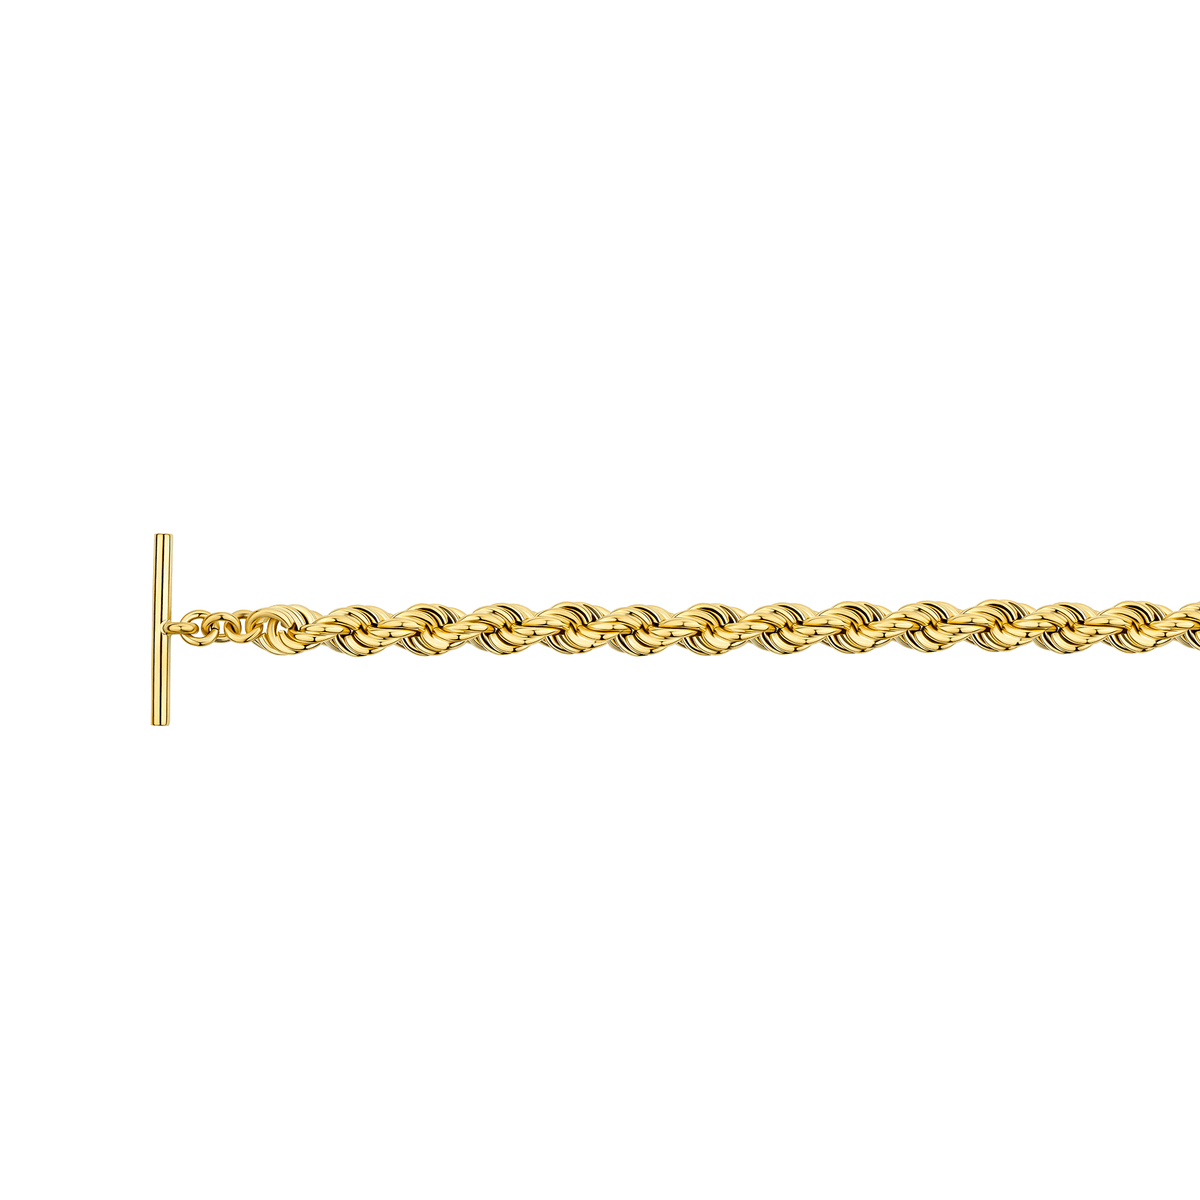 Handmade Anniversary Rope Bracelet in 18ct Yellow Gold - Wallace Bishop